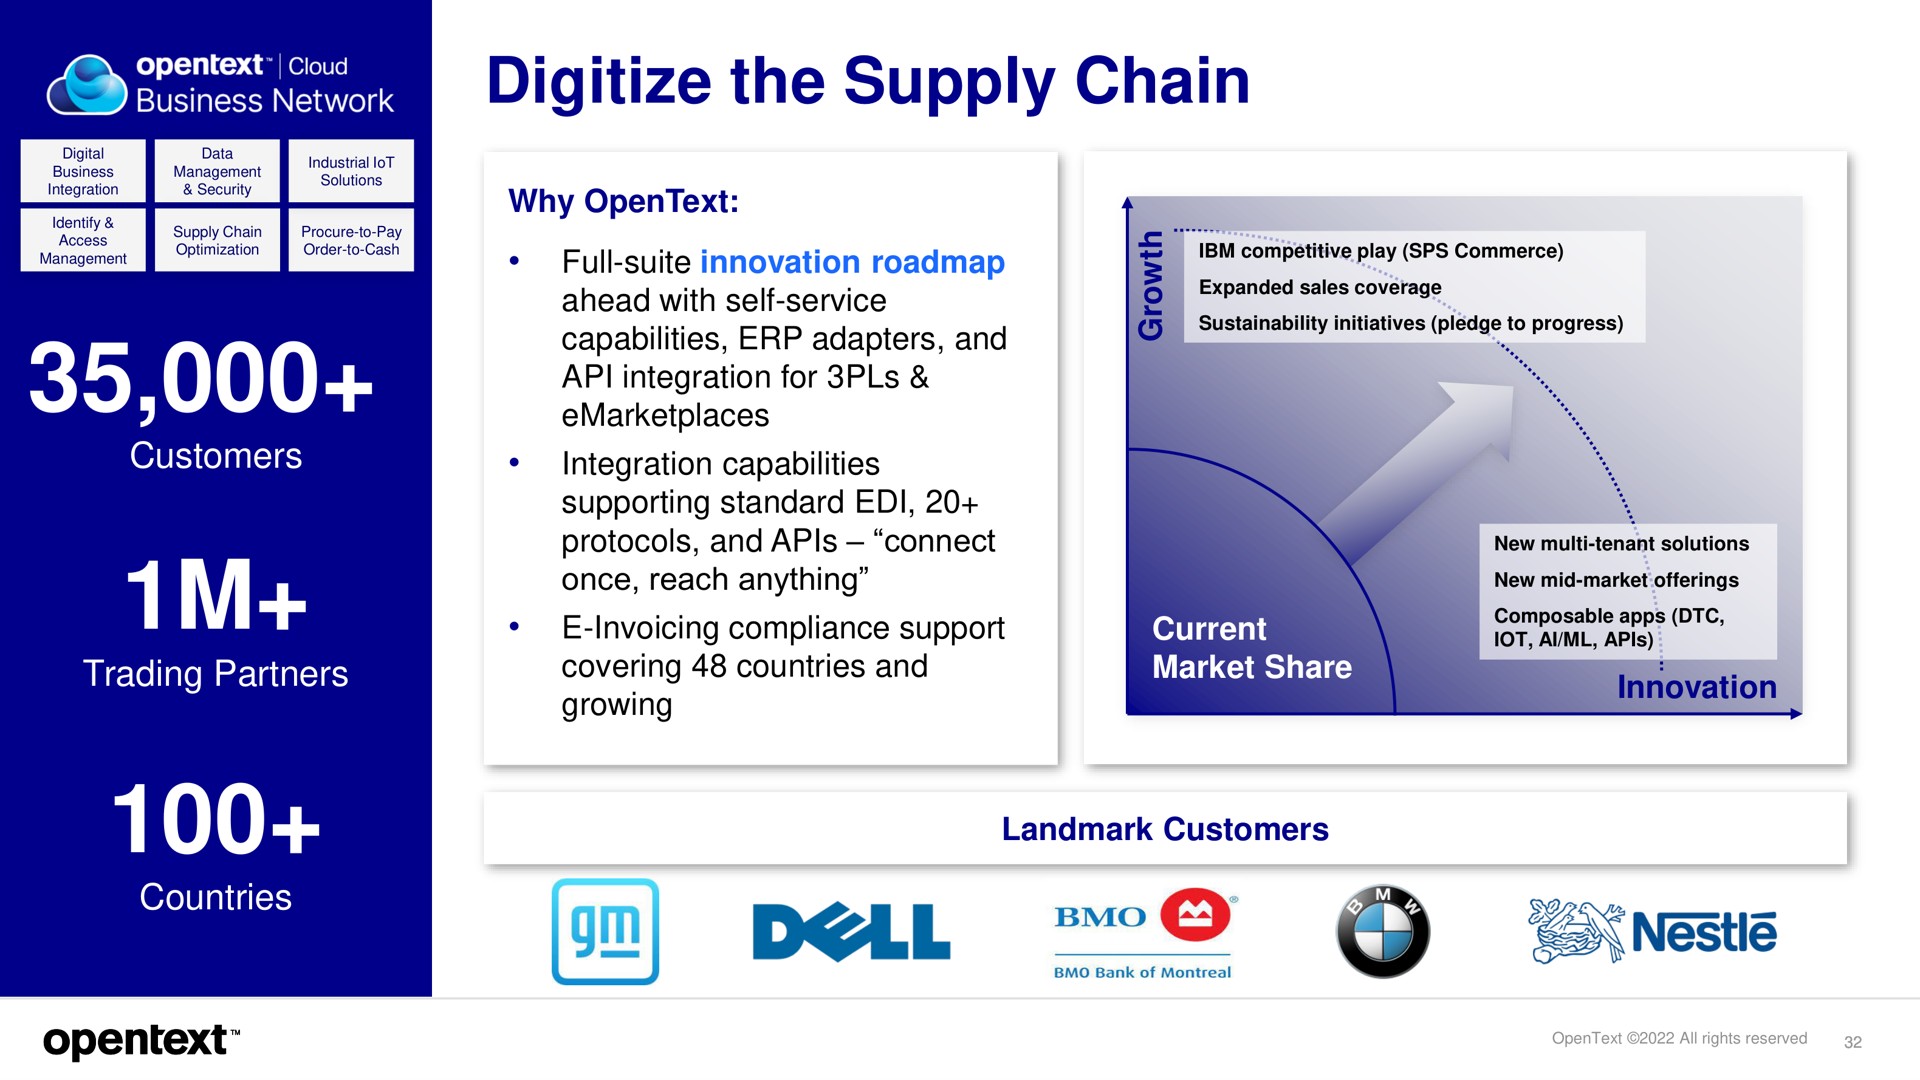 digitize the supply chain doll nestle | OpenText